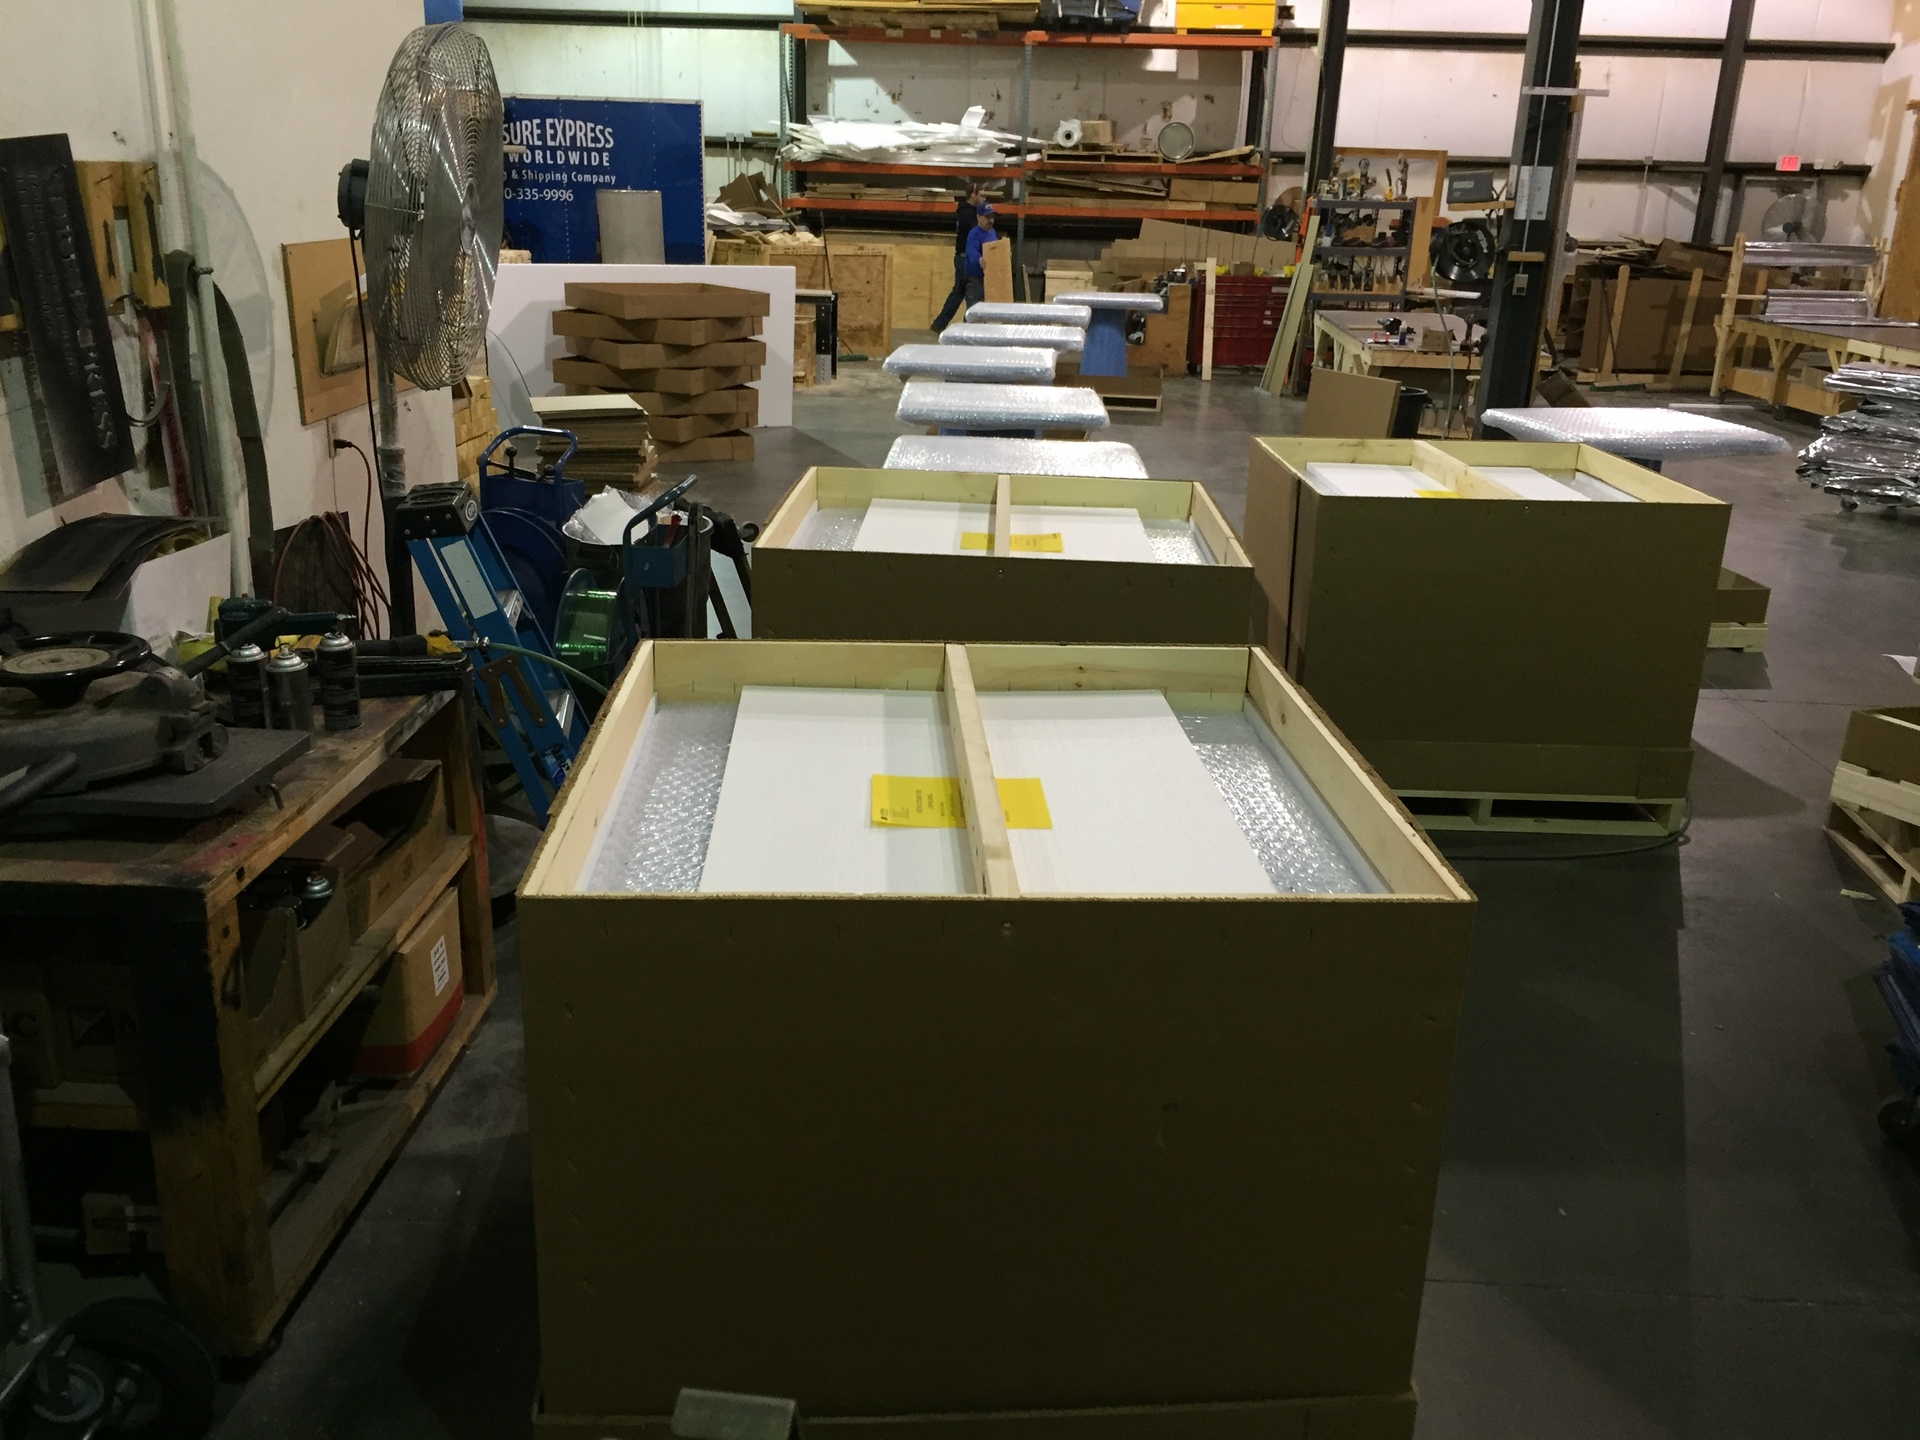 Tables crated and packaged